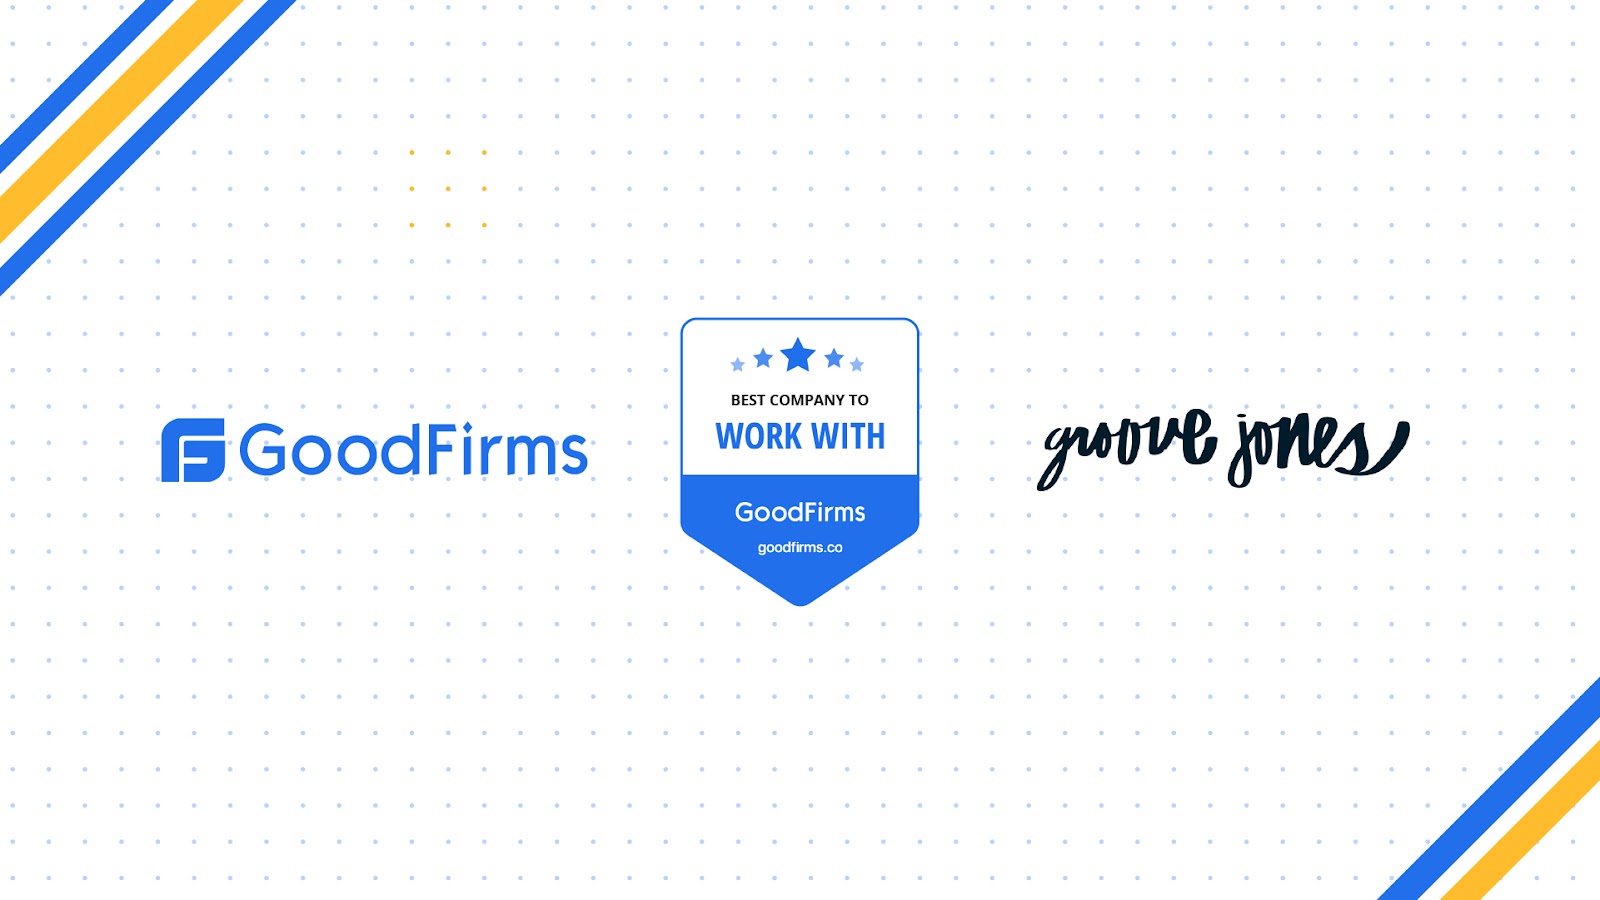 GoodFirms Best Company to Work With